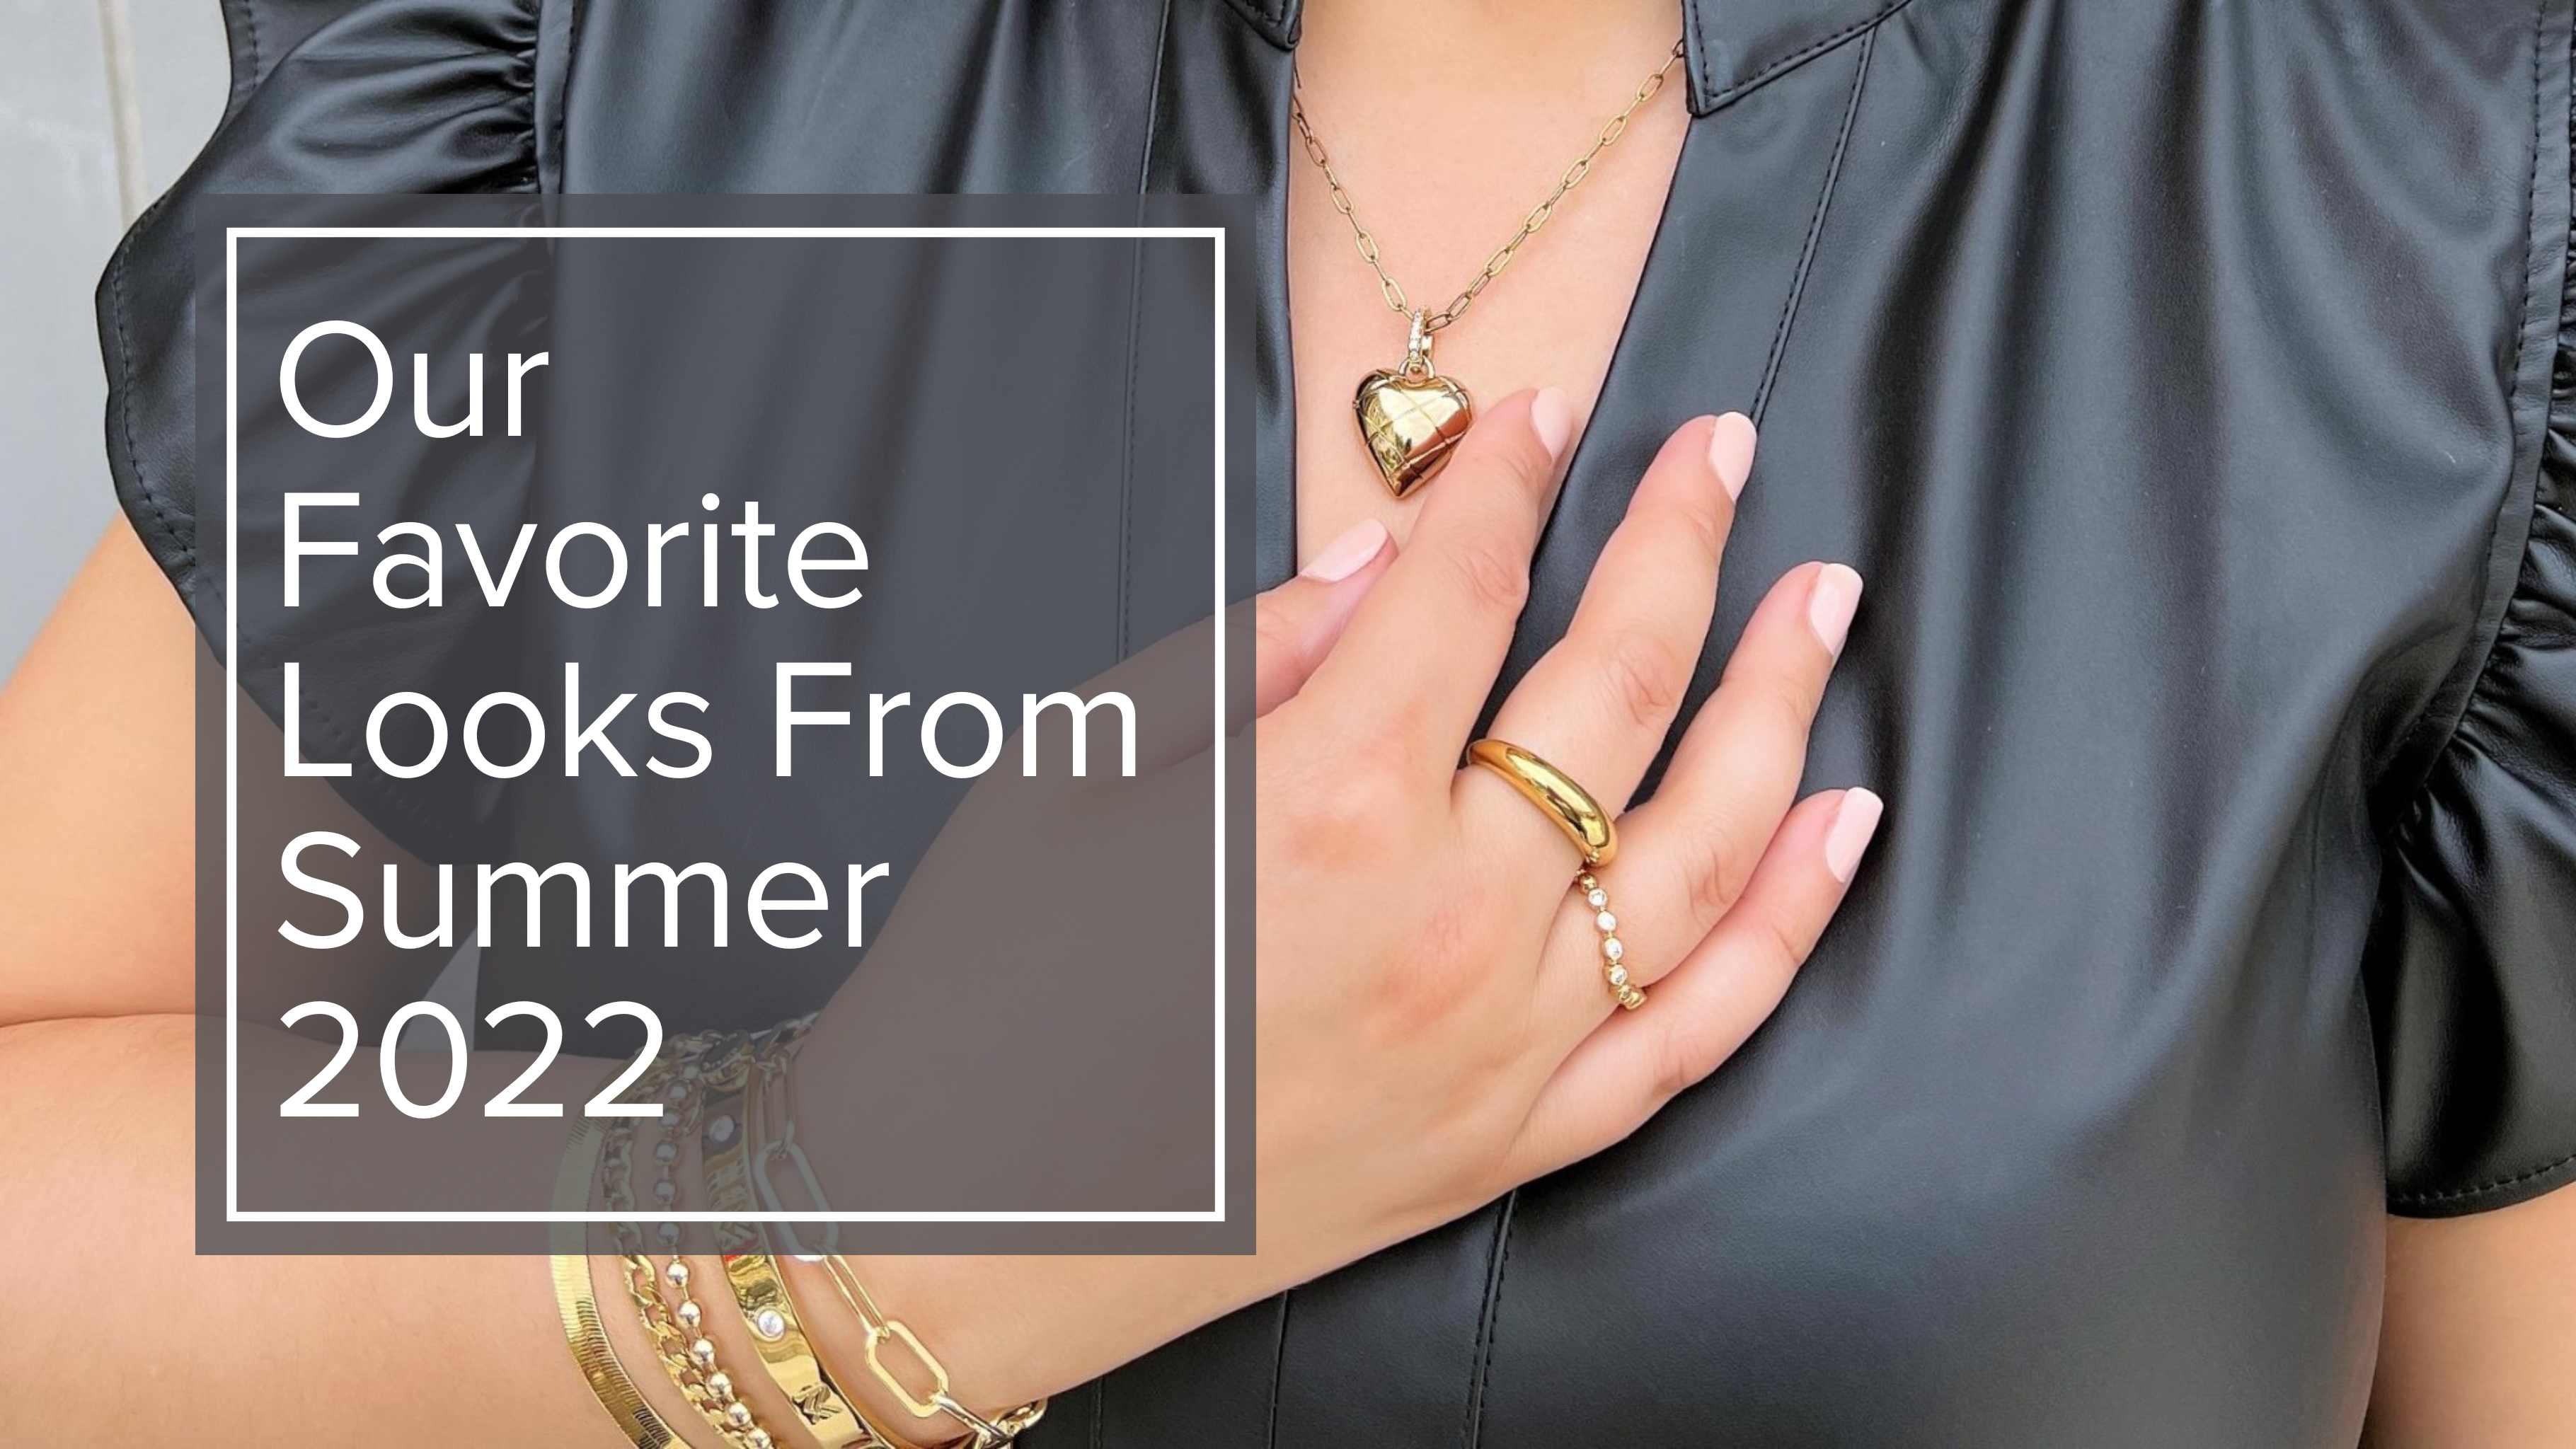 Our Favorite Looks From Summer 2022